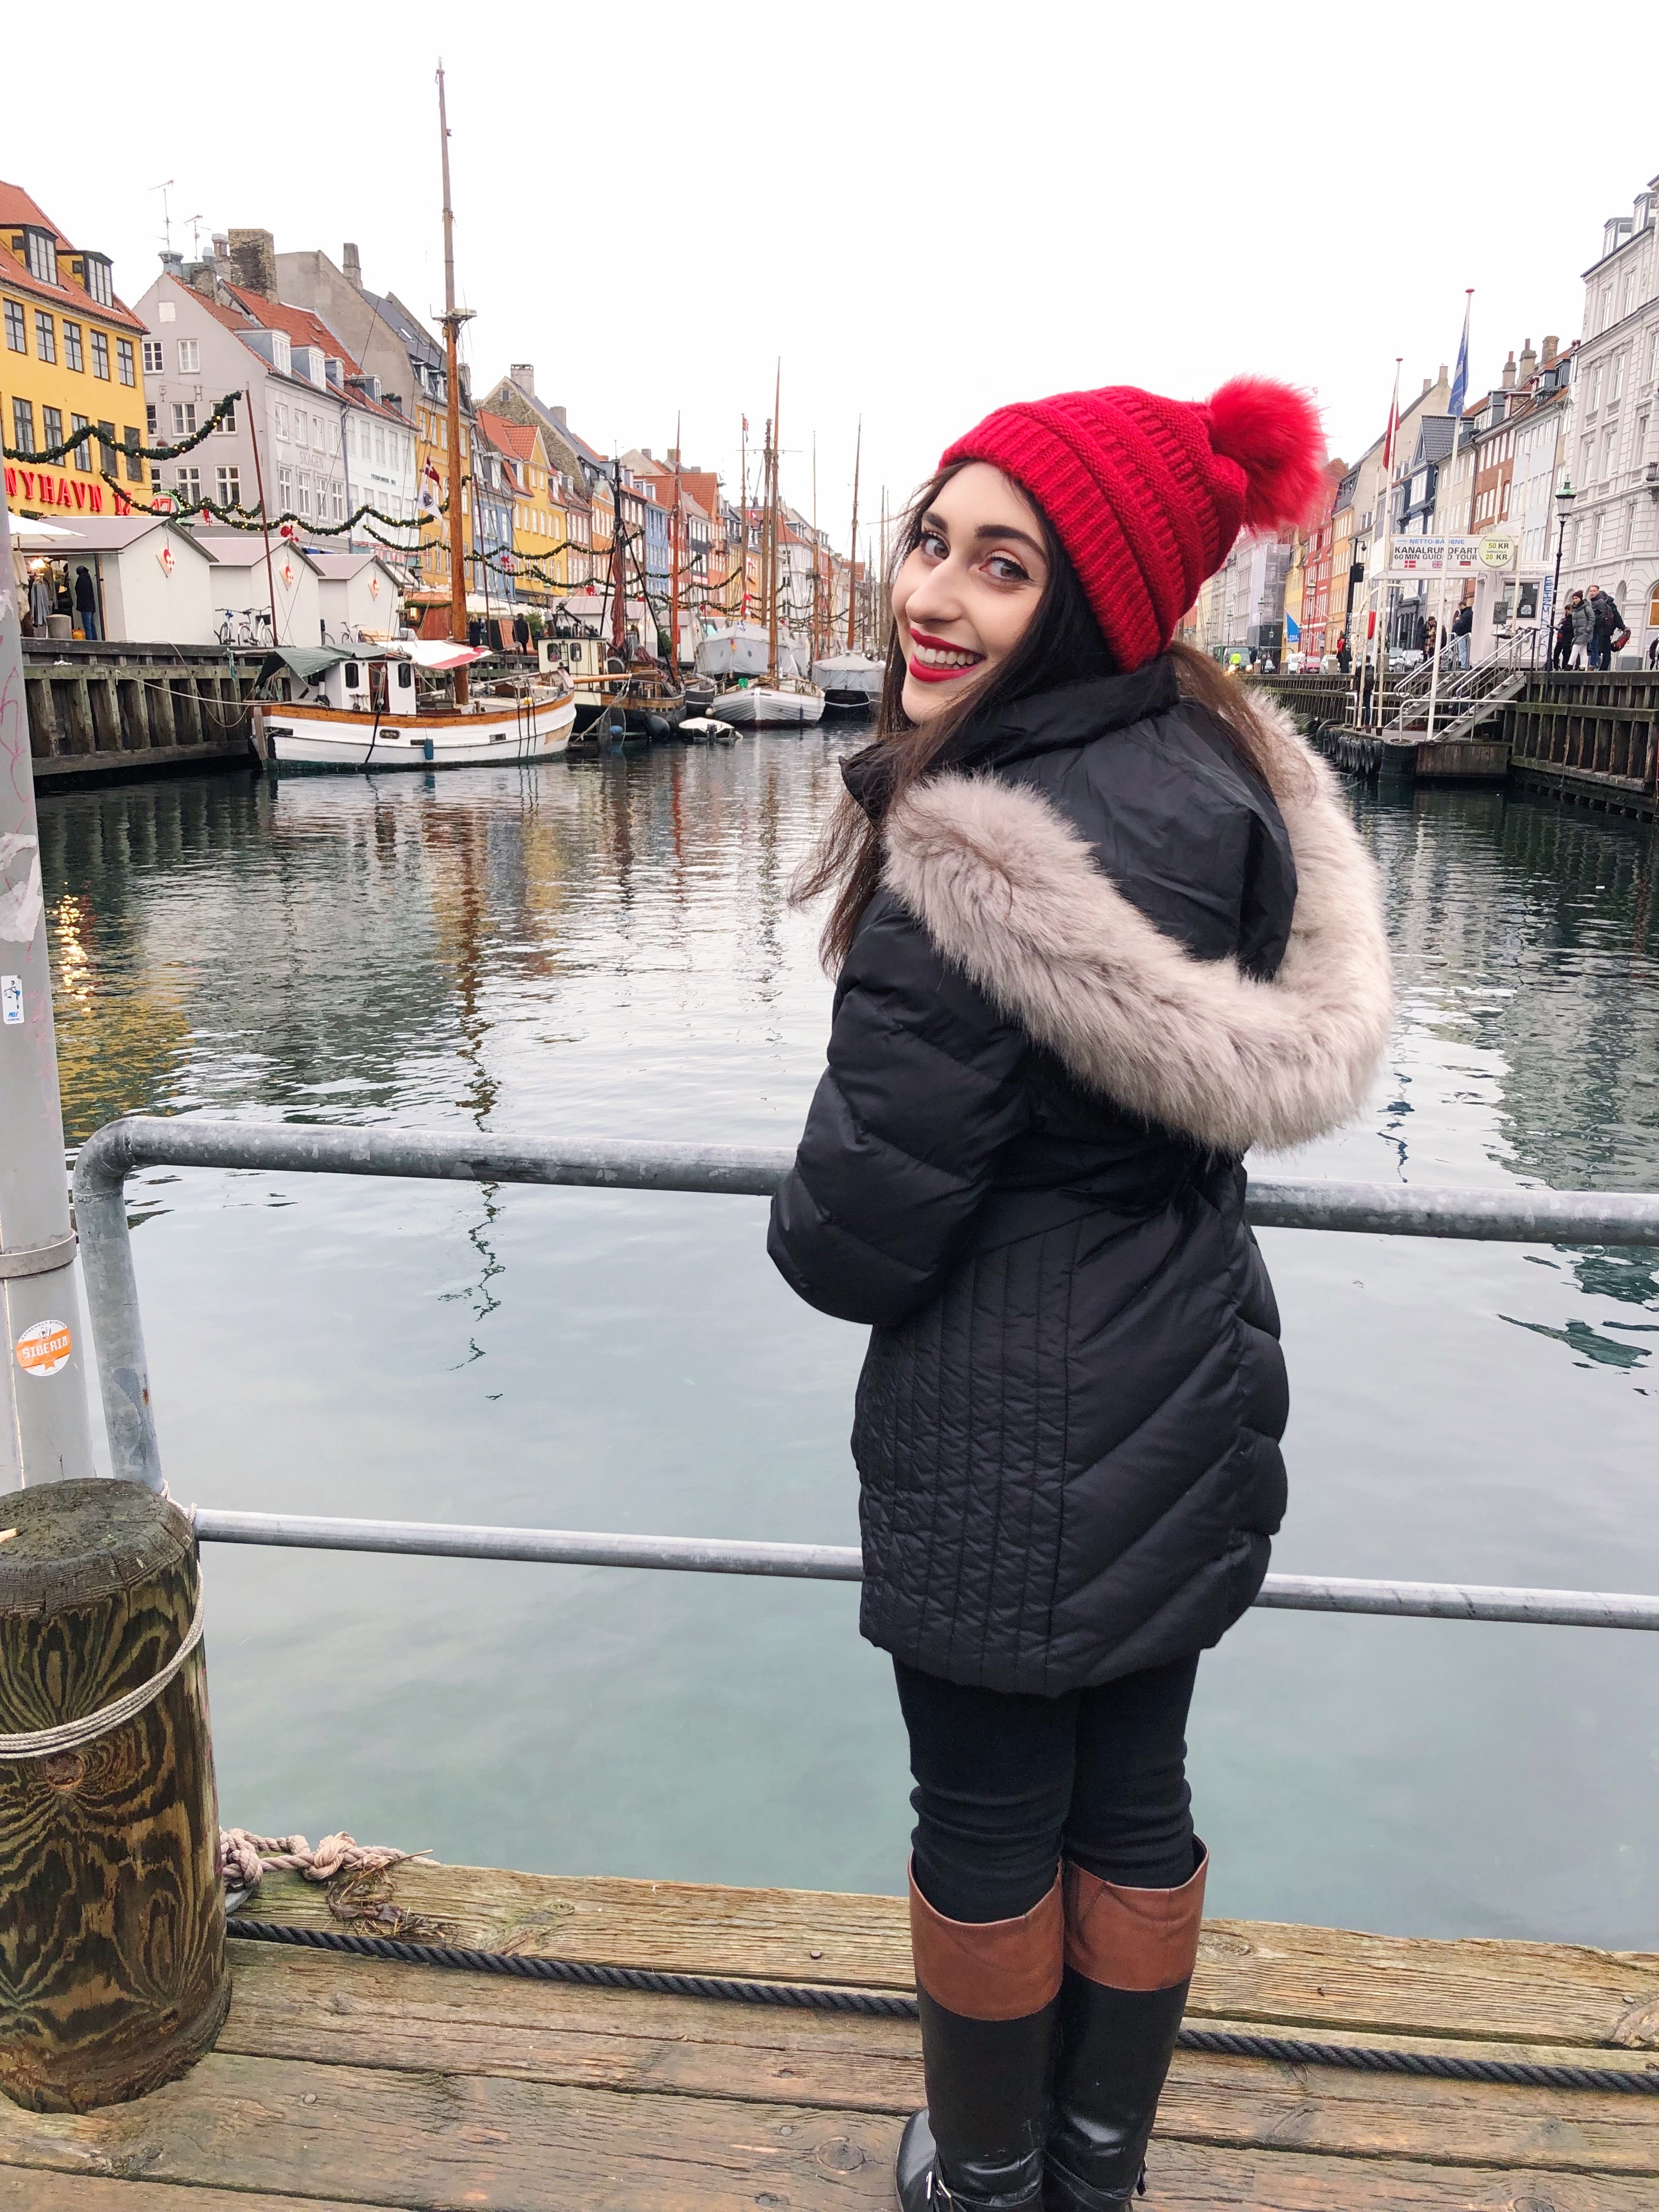 Copenhagen Travel Guide - Tips for visiting Copenhagen in Winter // What to see, what to eat, and what to skip - ew & pt